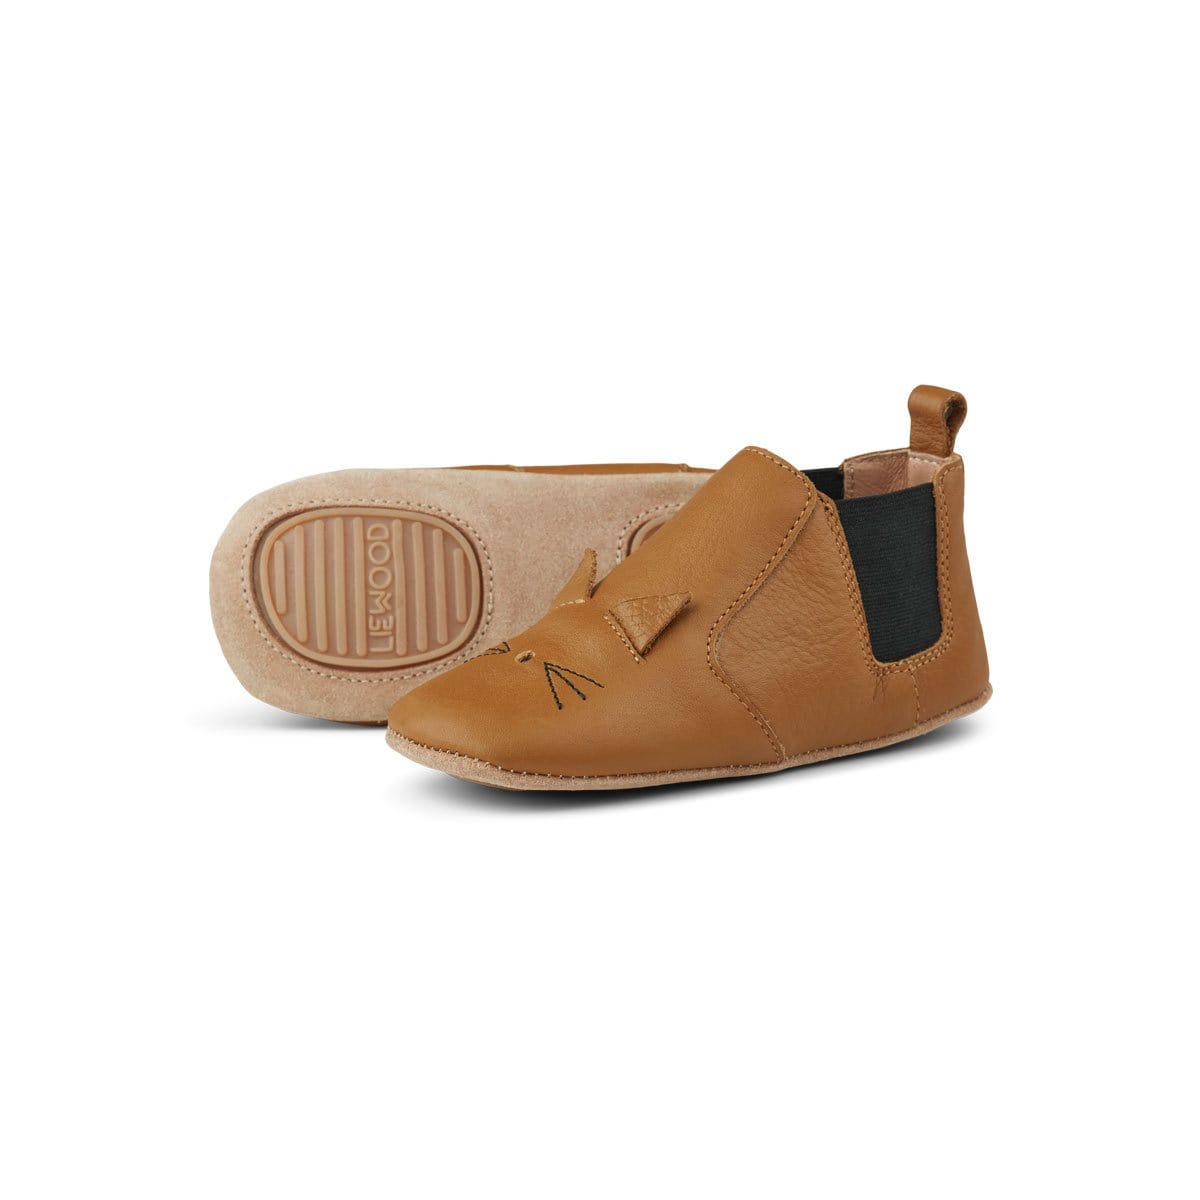 Liewood Shoes Edith Leather Slippers - Cat Golden Caramel